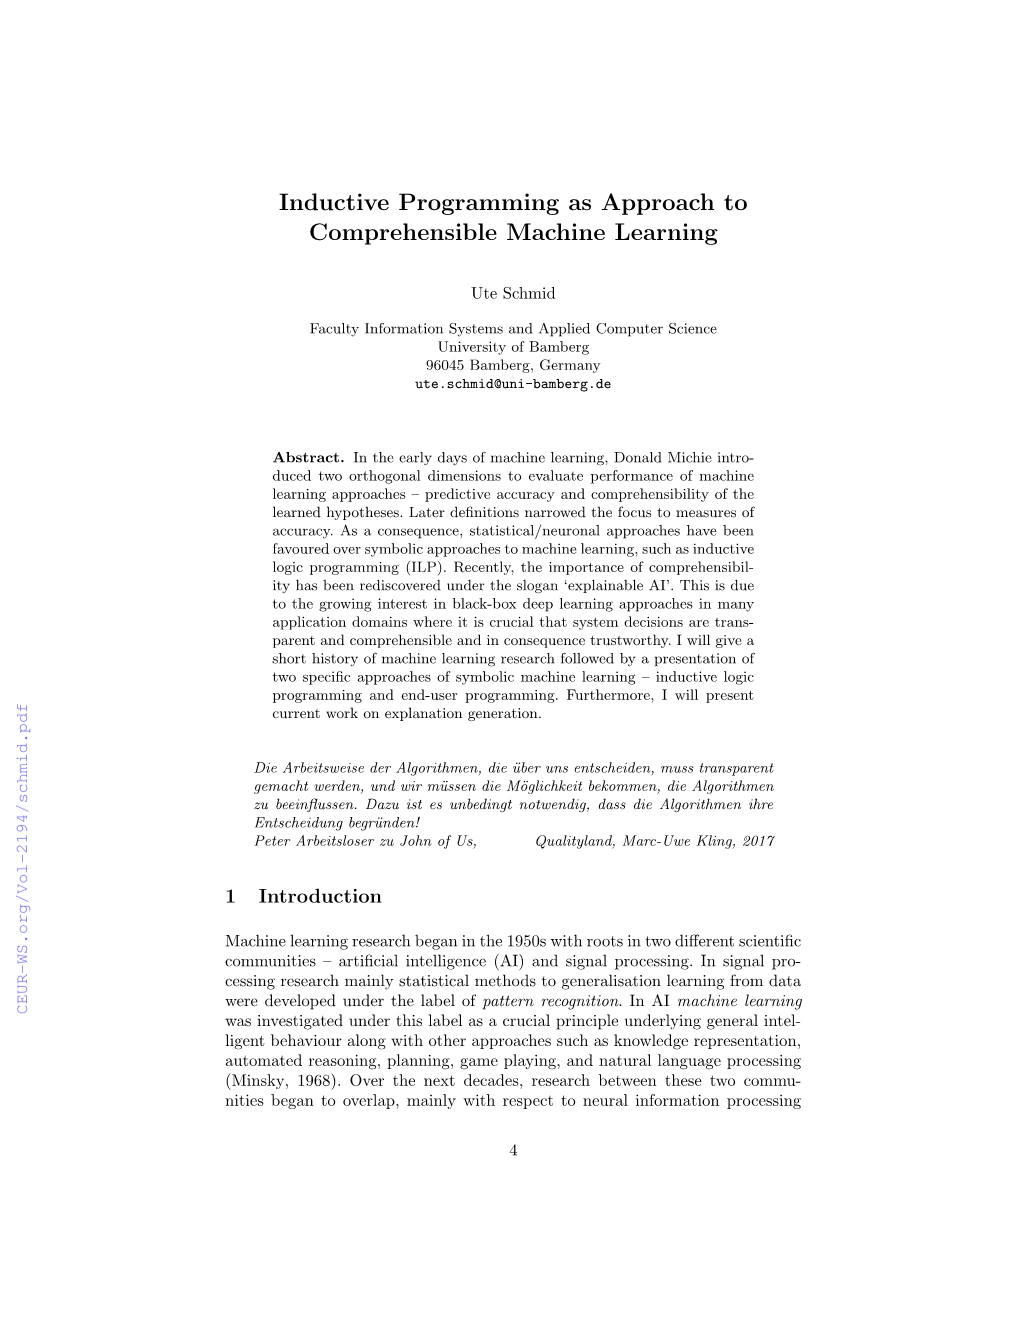 Inductive Programming As Approach to Comprehensible Machine Learning